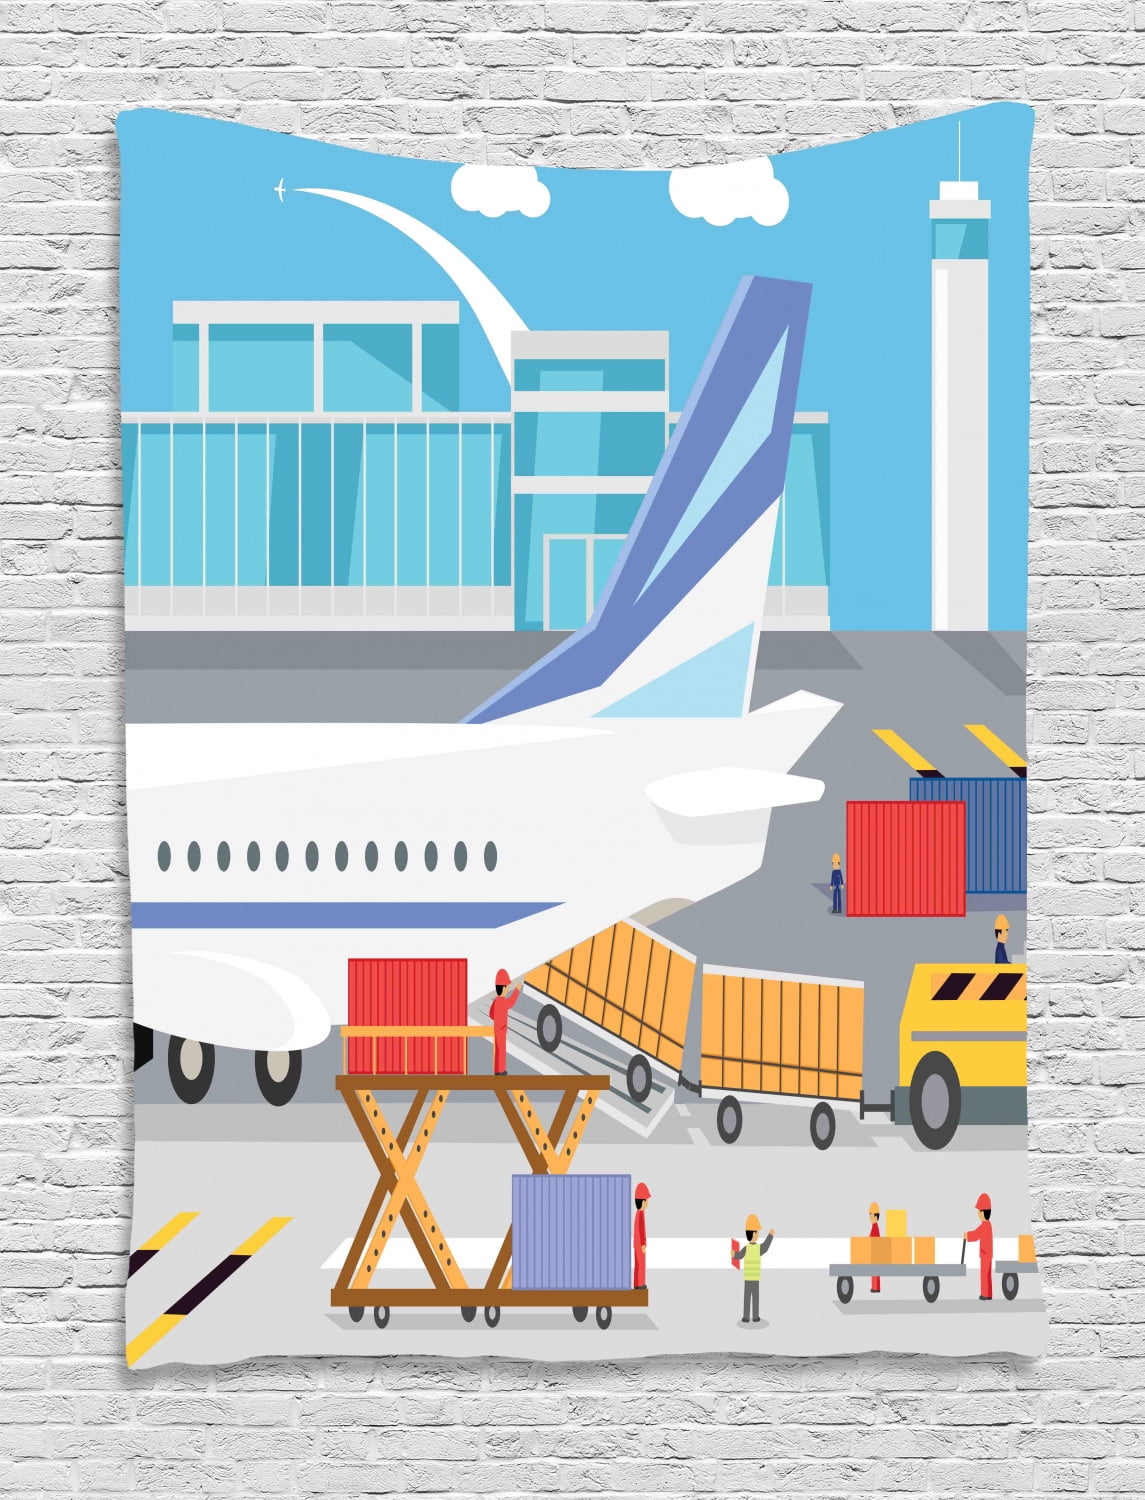 Airport Tapestry, Transportation Cartoon Composition of Loading Freight  Containers in Cargo Plane, Wall Hanging for Bedroom Living Room Dorm Decor,  40W X 60L Inches, Multicolor, by Ambesonne 